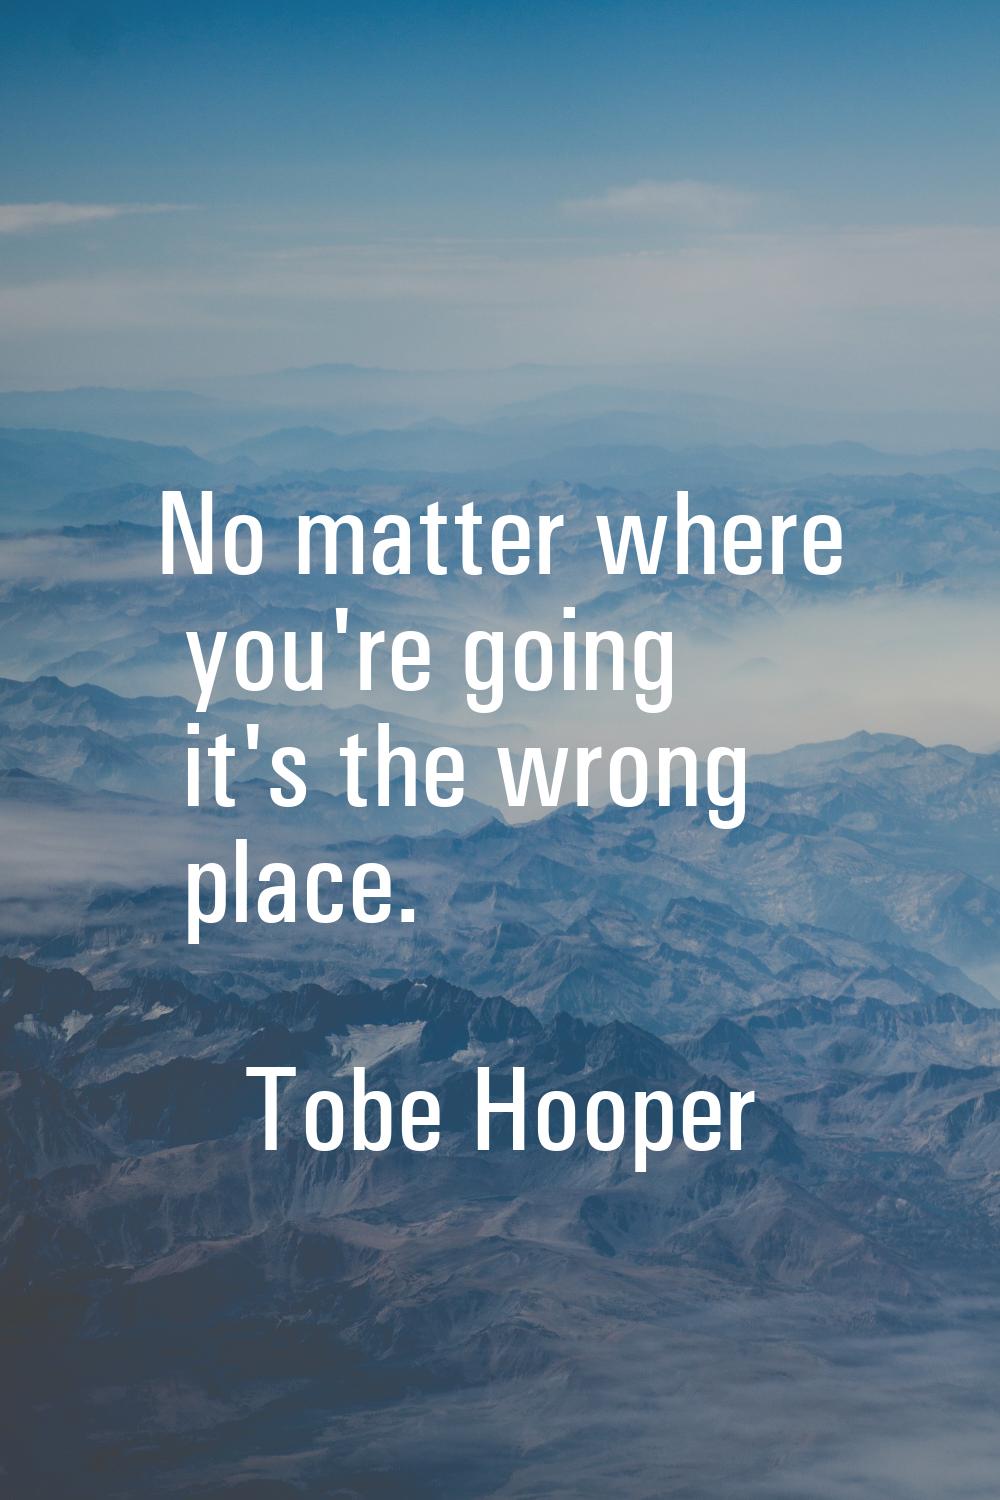 No matter where you're going it's the wrong place.